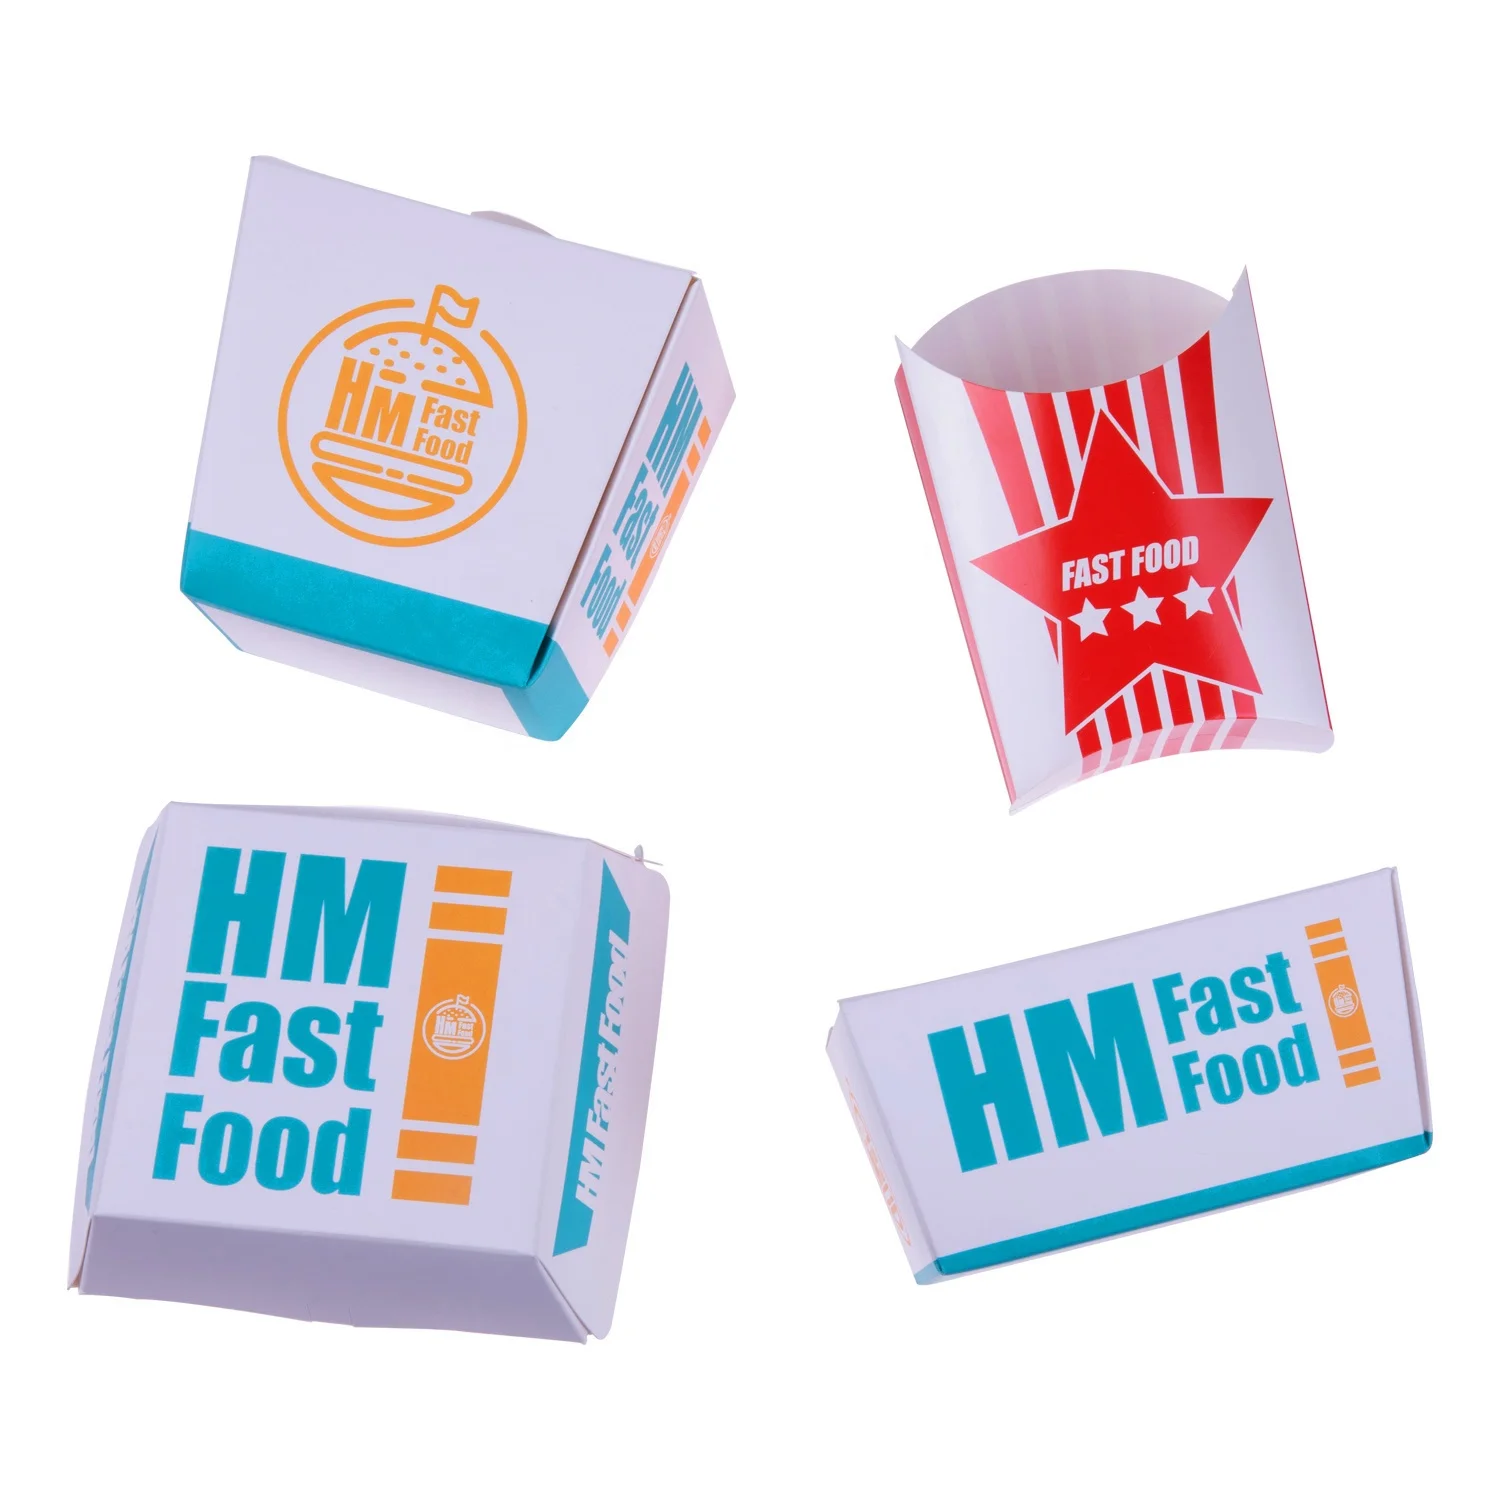 Source Disposable takeaway biodegradable printed paper box fast food  packaging on m.